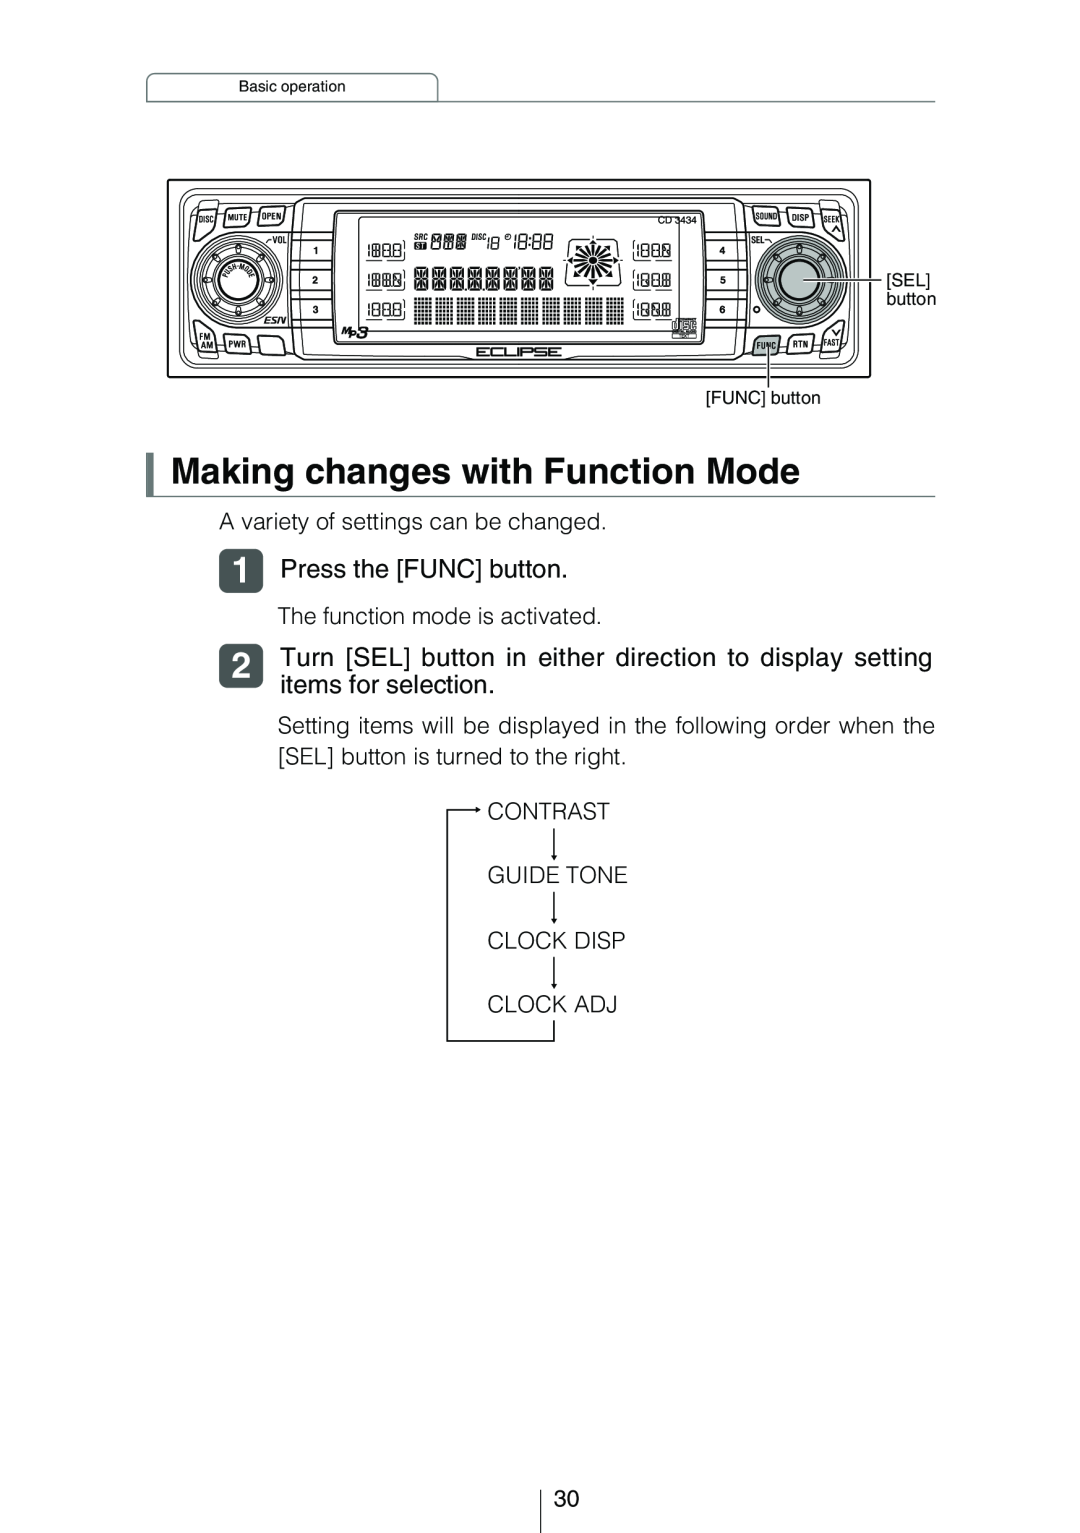 Eclipse - Fujitsu Ten CD3434 owner manual Making changes with Function Mode, Press the FUNC button, items for selection 